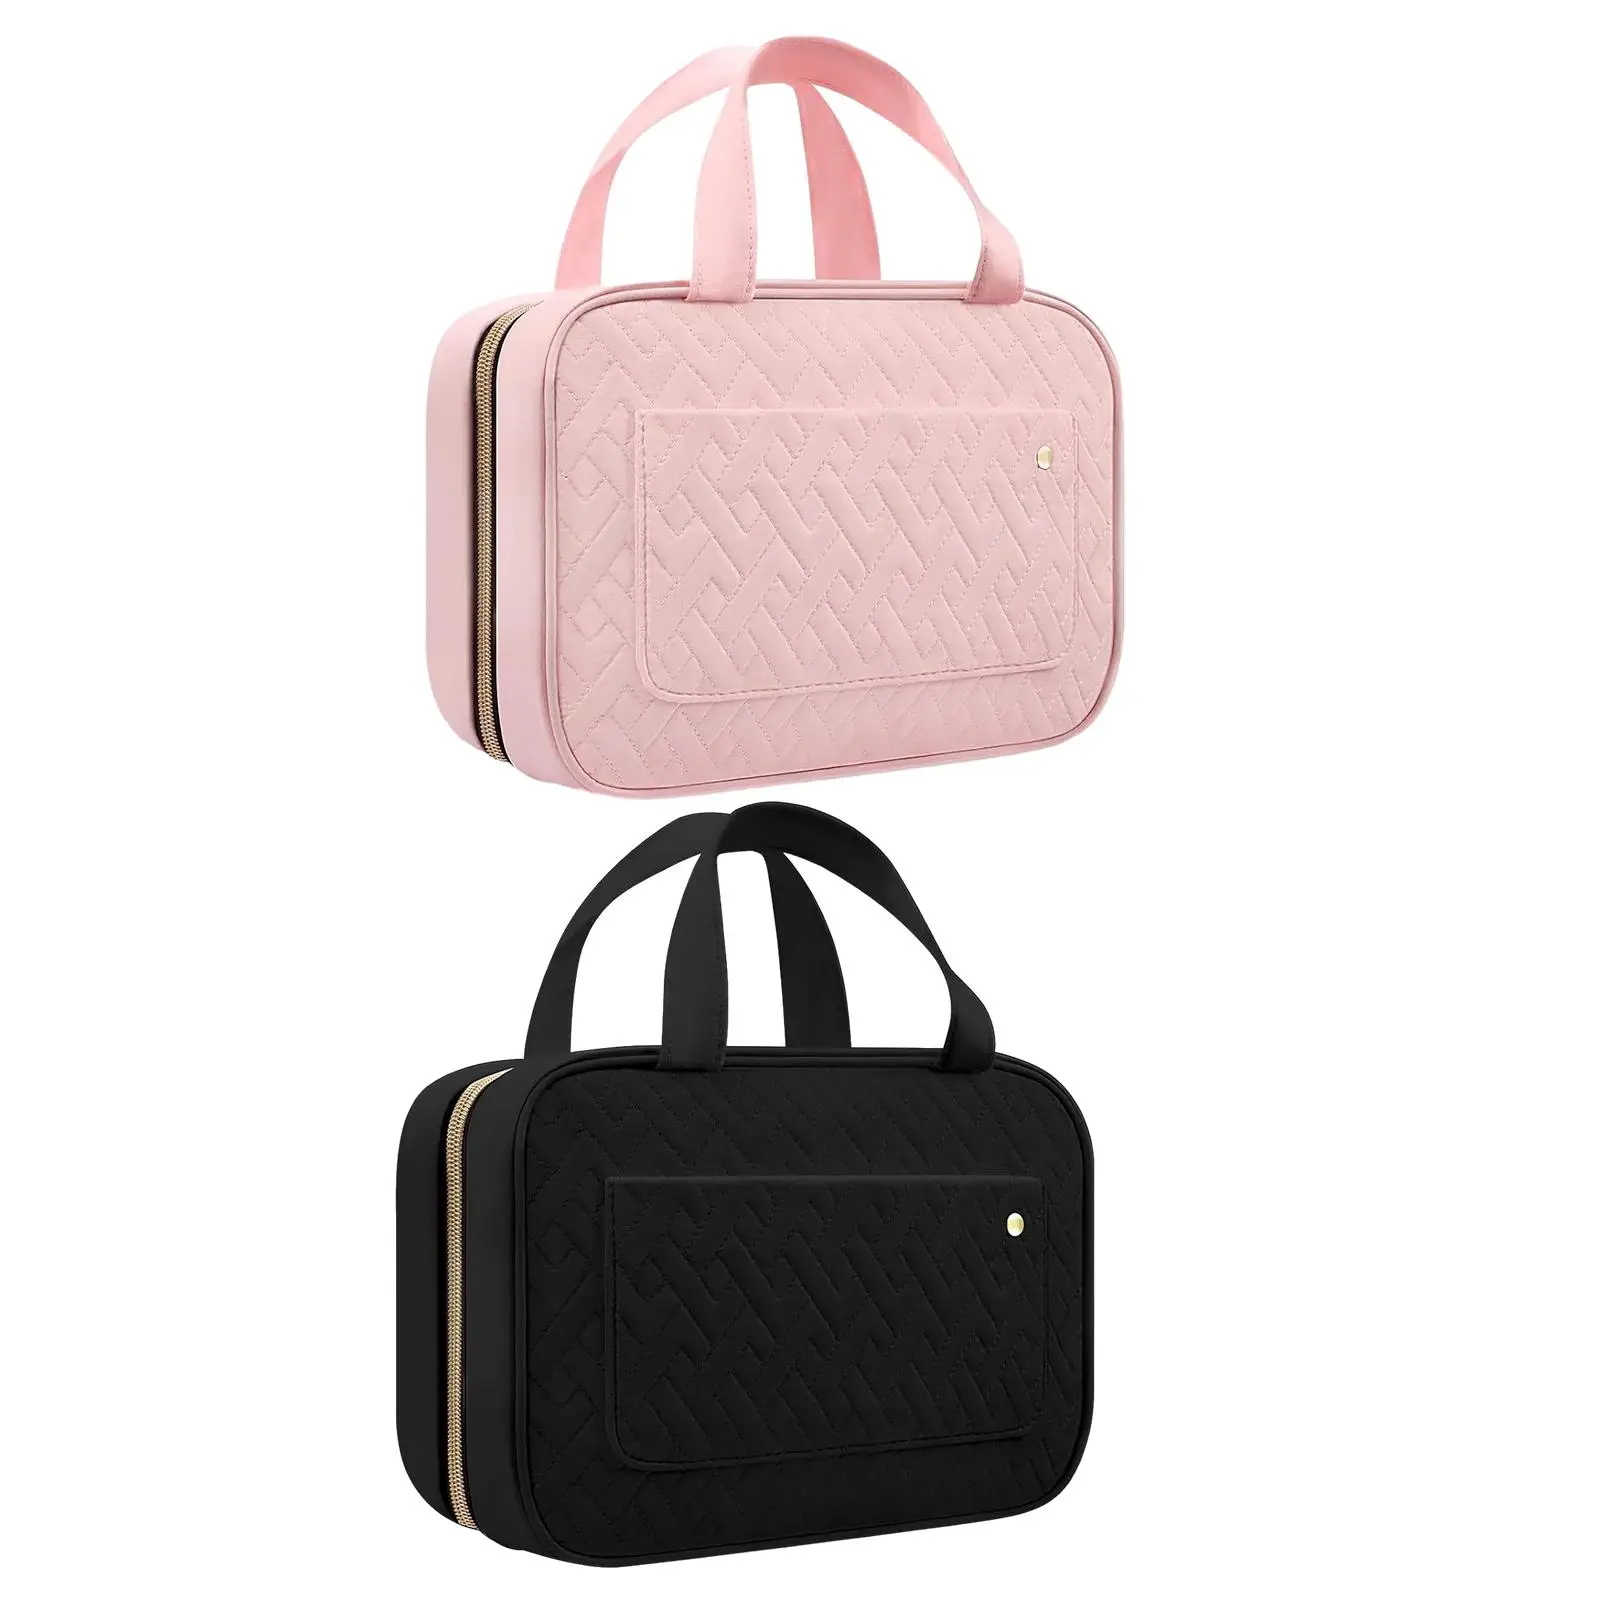 Toiletry Bag Toiletries 4 Compartments Essentials Makeup Container Large Women Hanging Makeup Case Cosmetic Bag for Travel Home